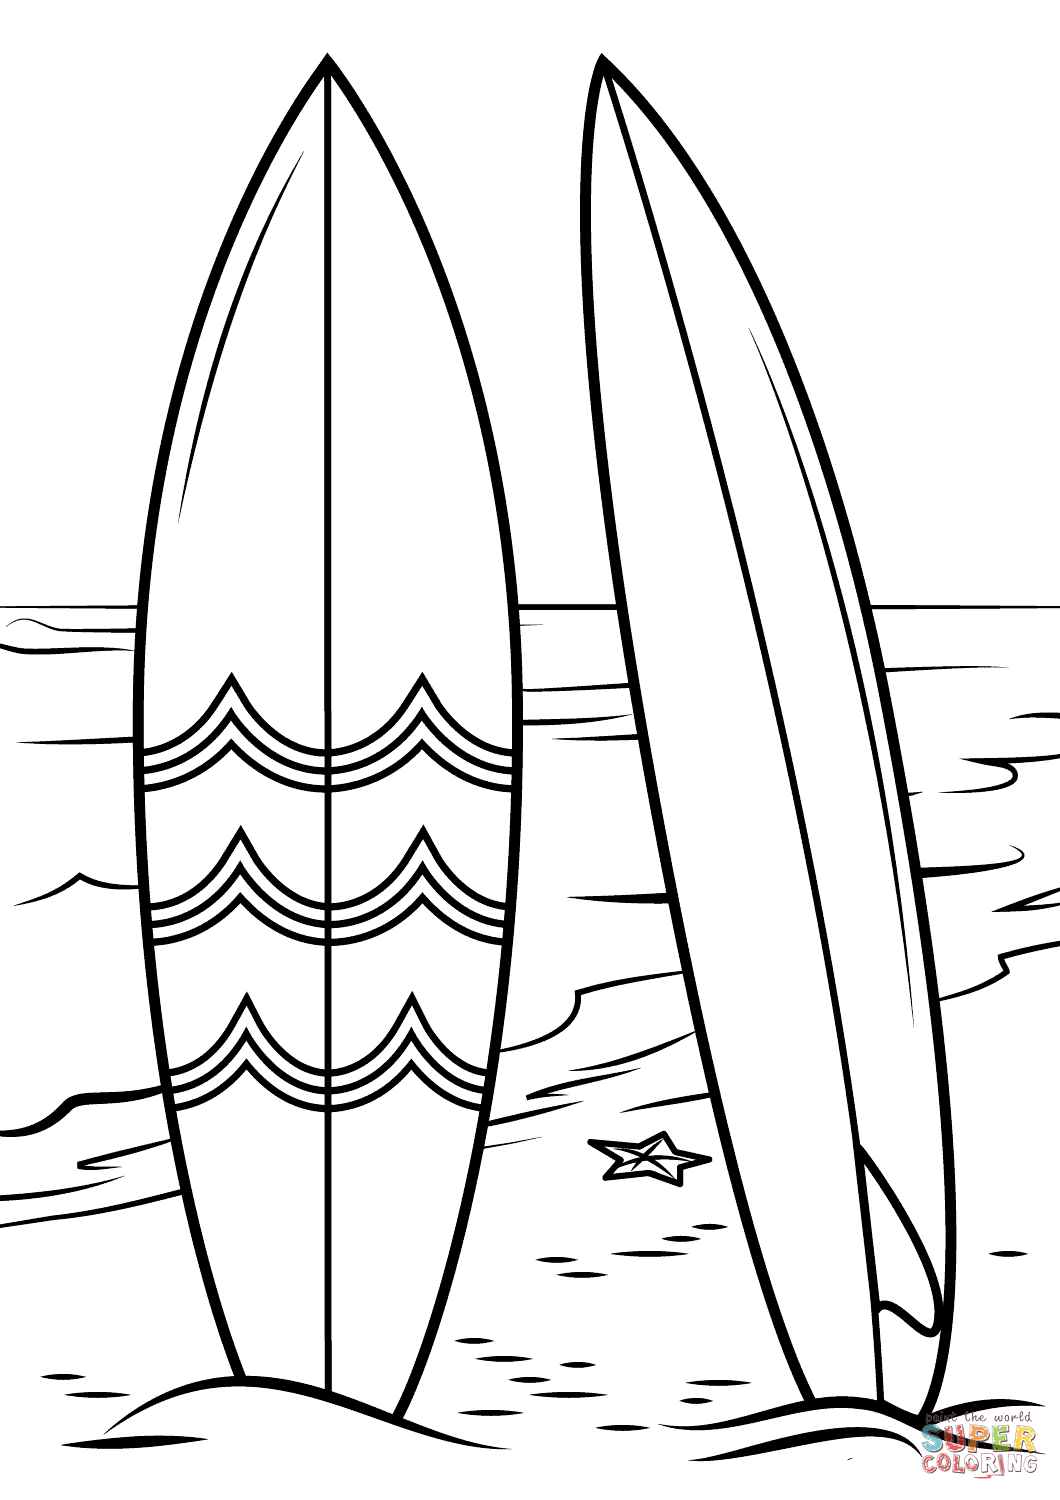 Surfboard coloring, Download Surfboard coloring for free 2019